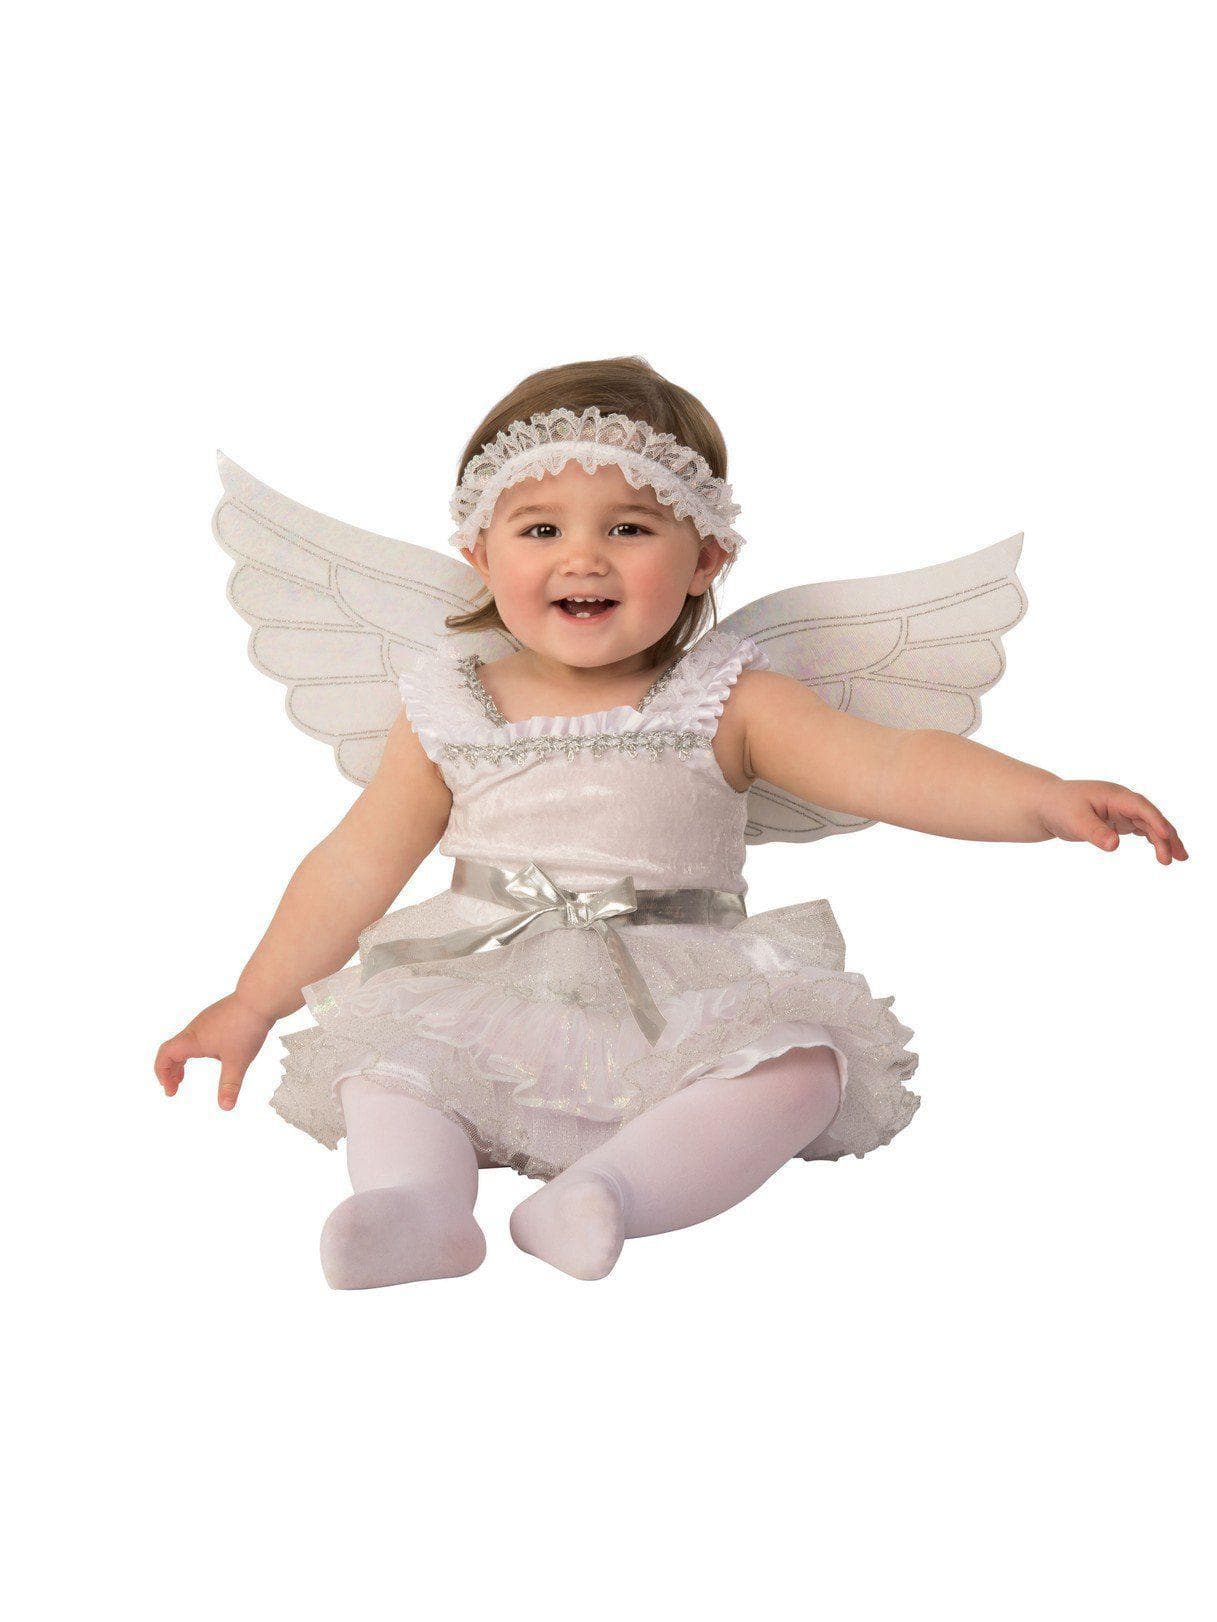 Baby/Toddler Little Angel Costume - costumes.com